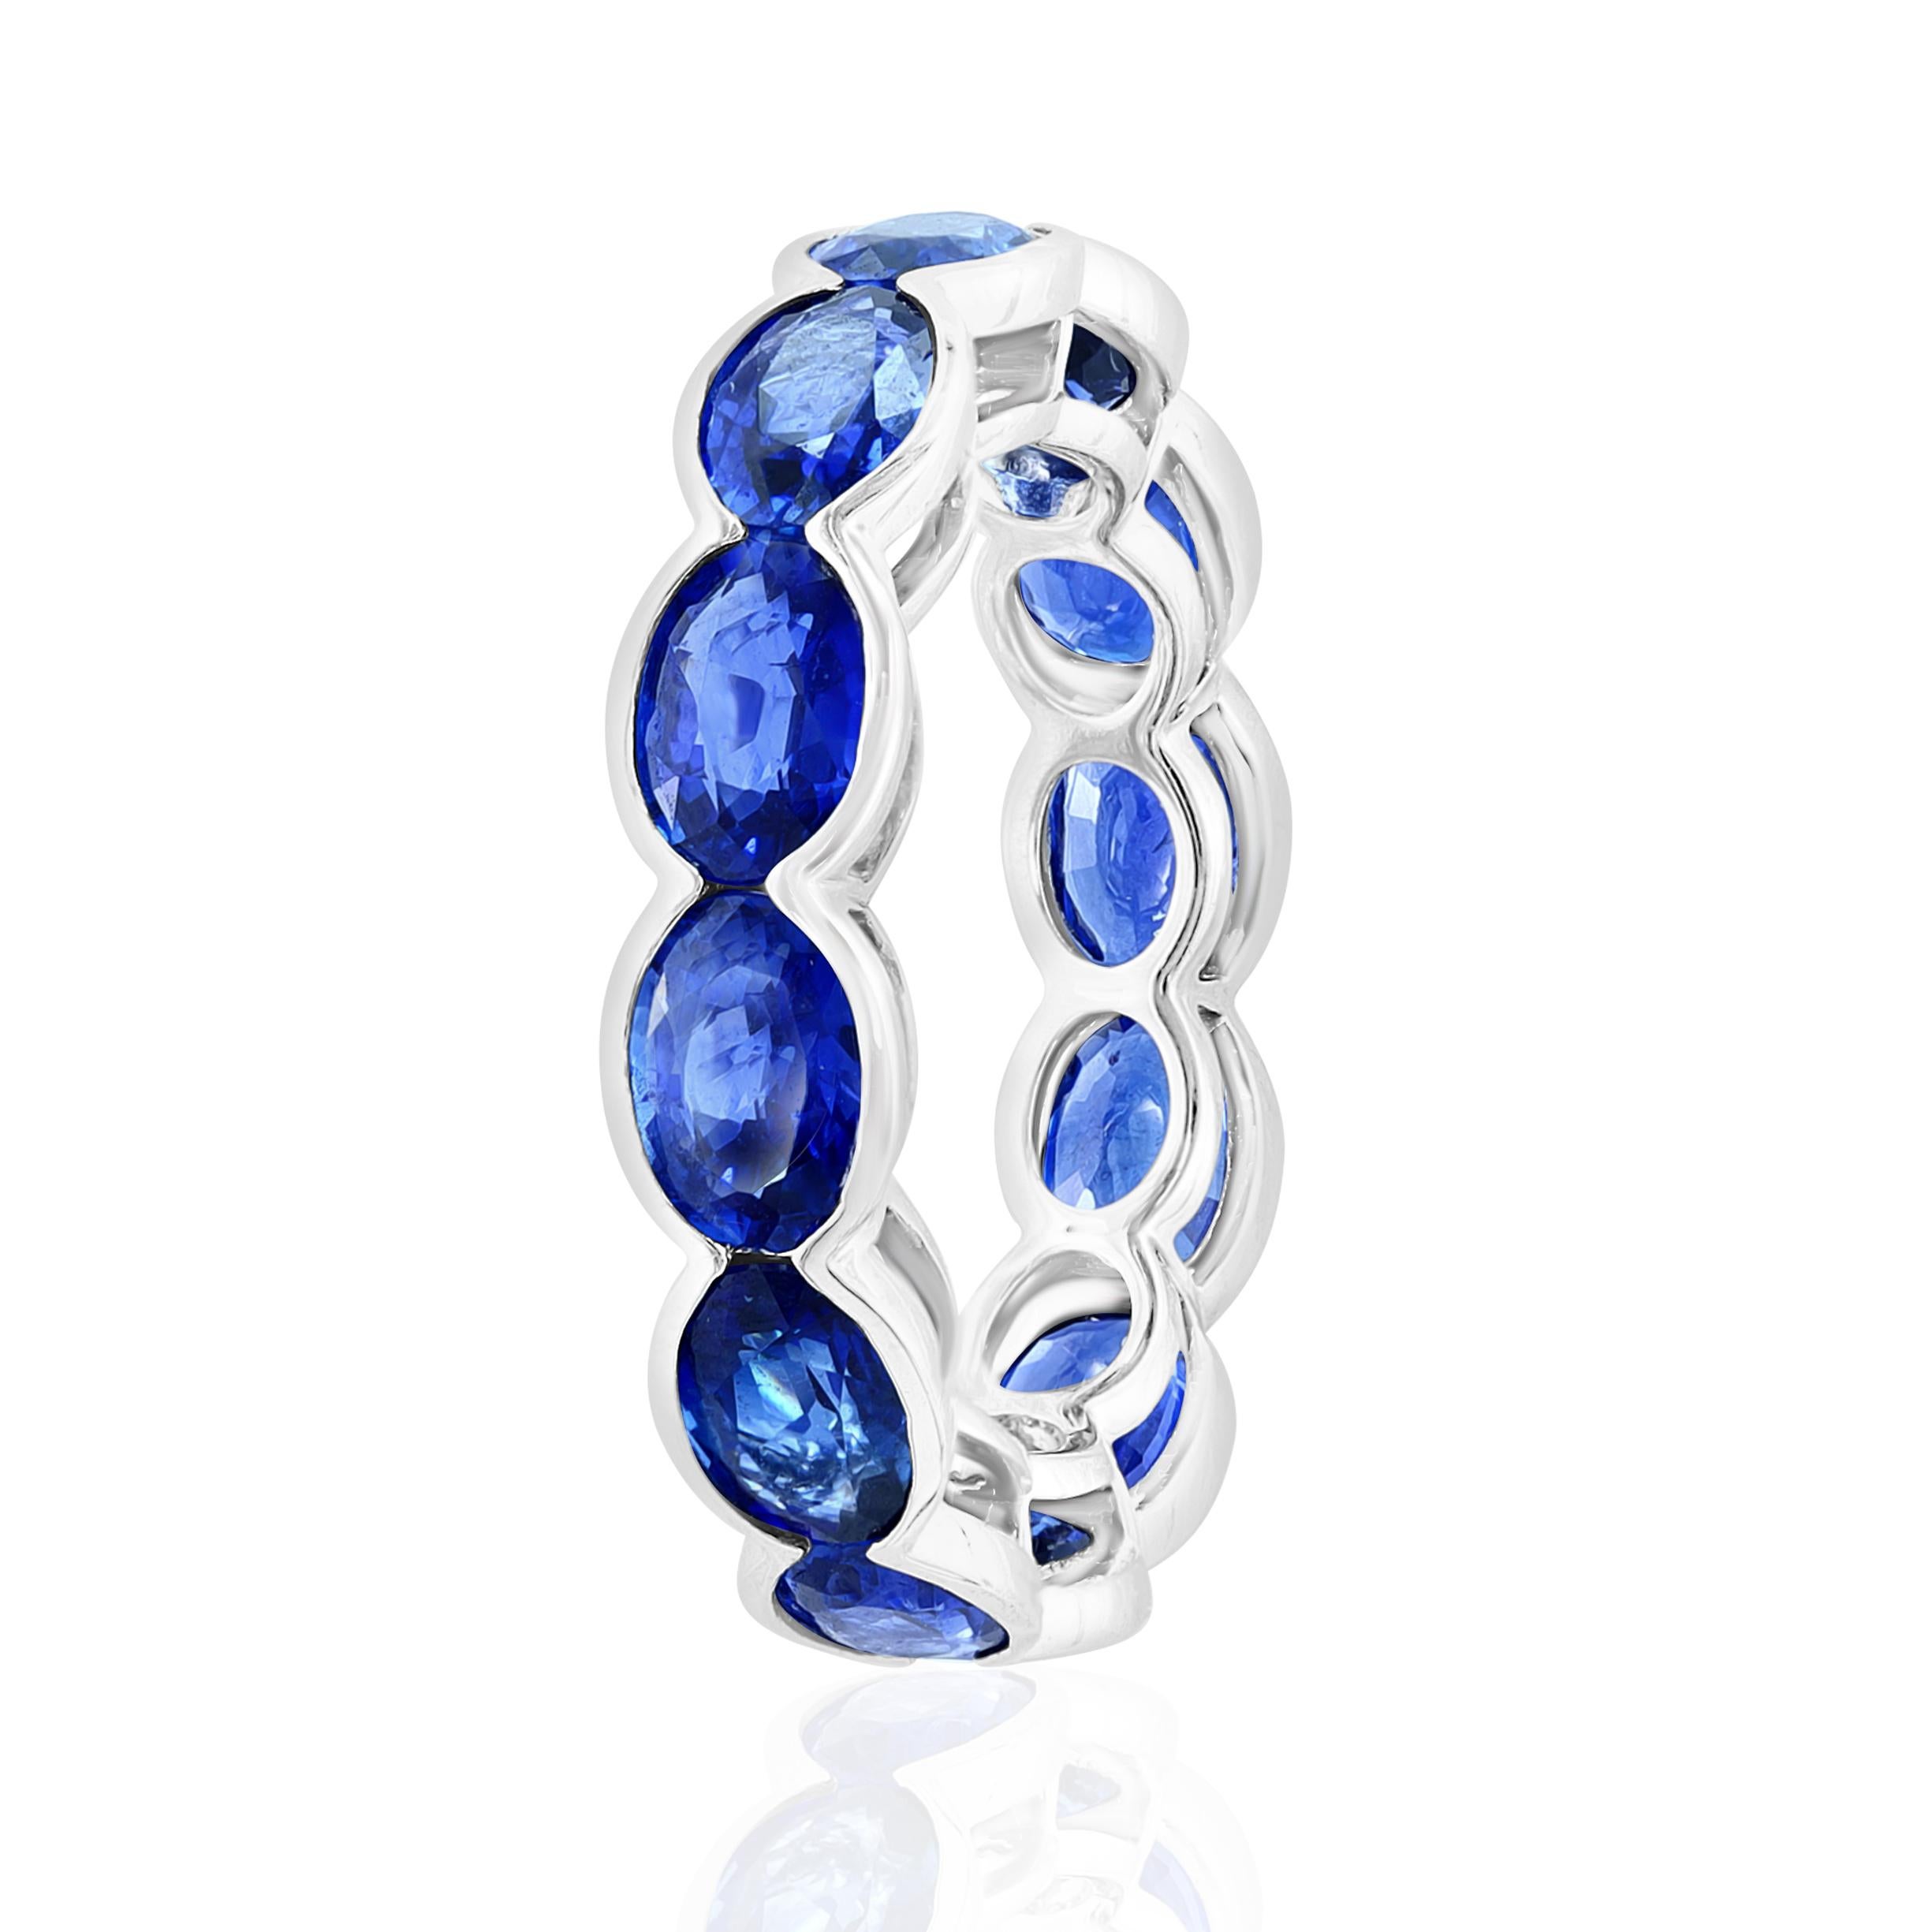 Semi Bezel Set Oval Gemstones

12 Sapphires weighing 6.86 Carats
Set in Platinum.

Also available in Emeralds and Rubies.